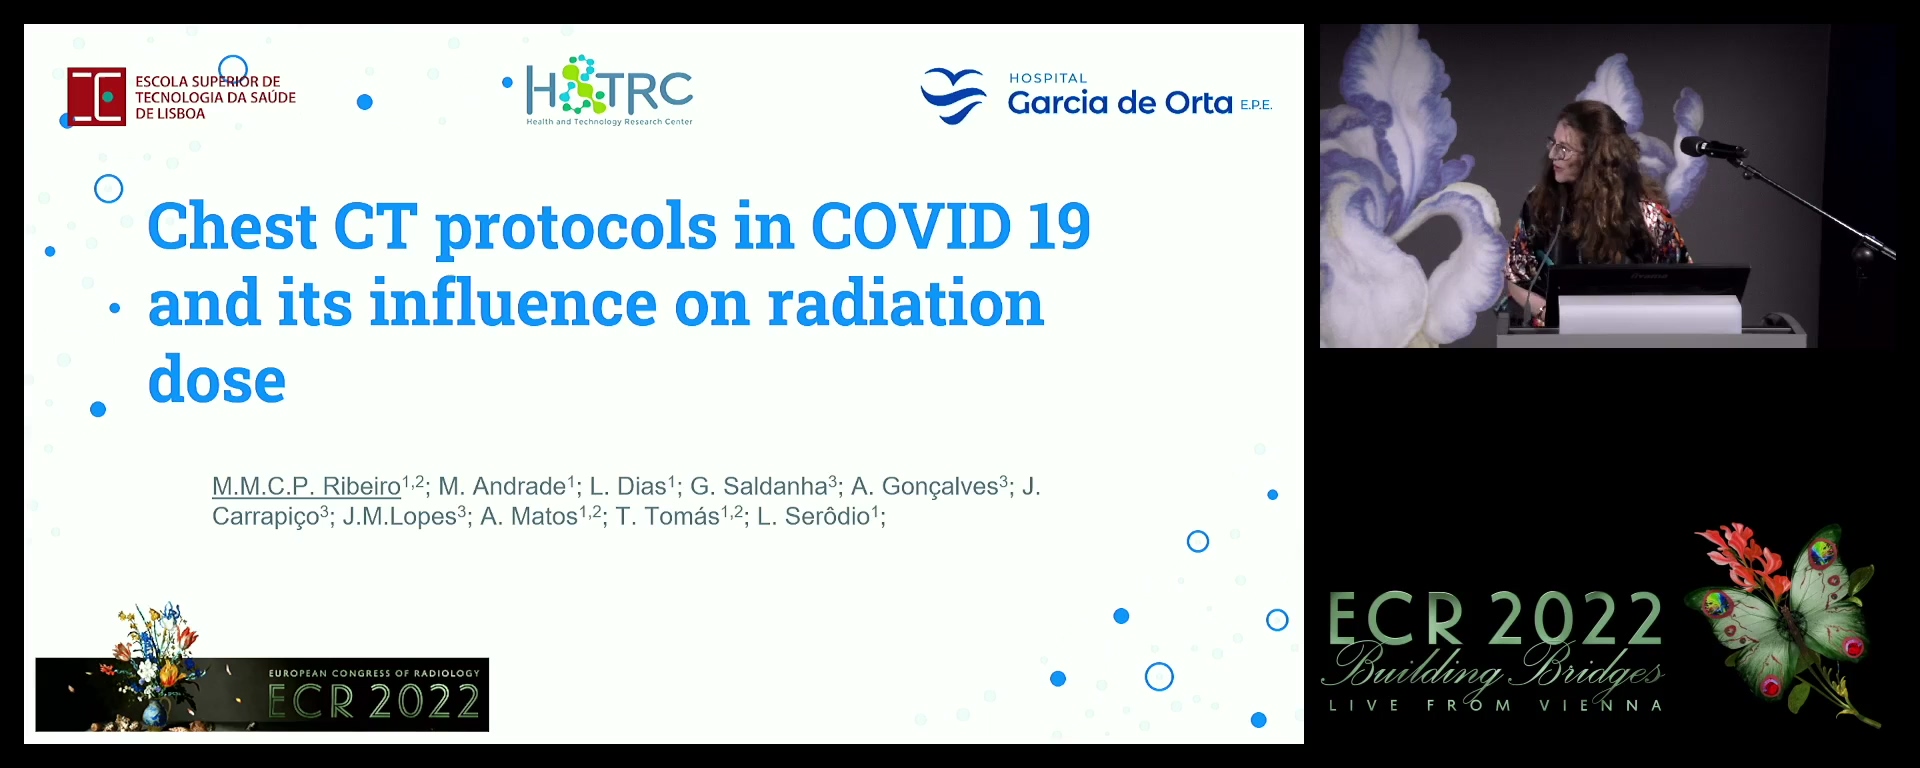 Chest CT protocols in COVID-19 and its influence on radiation dose - M. Margarida Ribeiro, Lisbon / PT